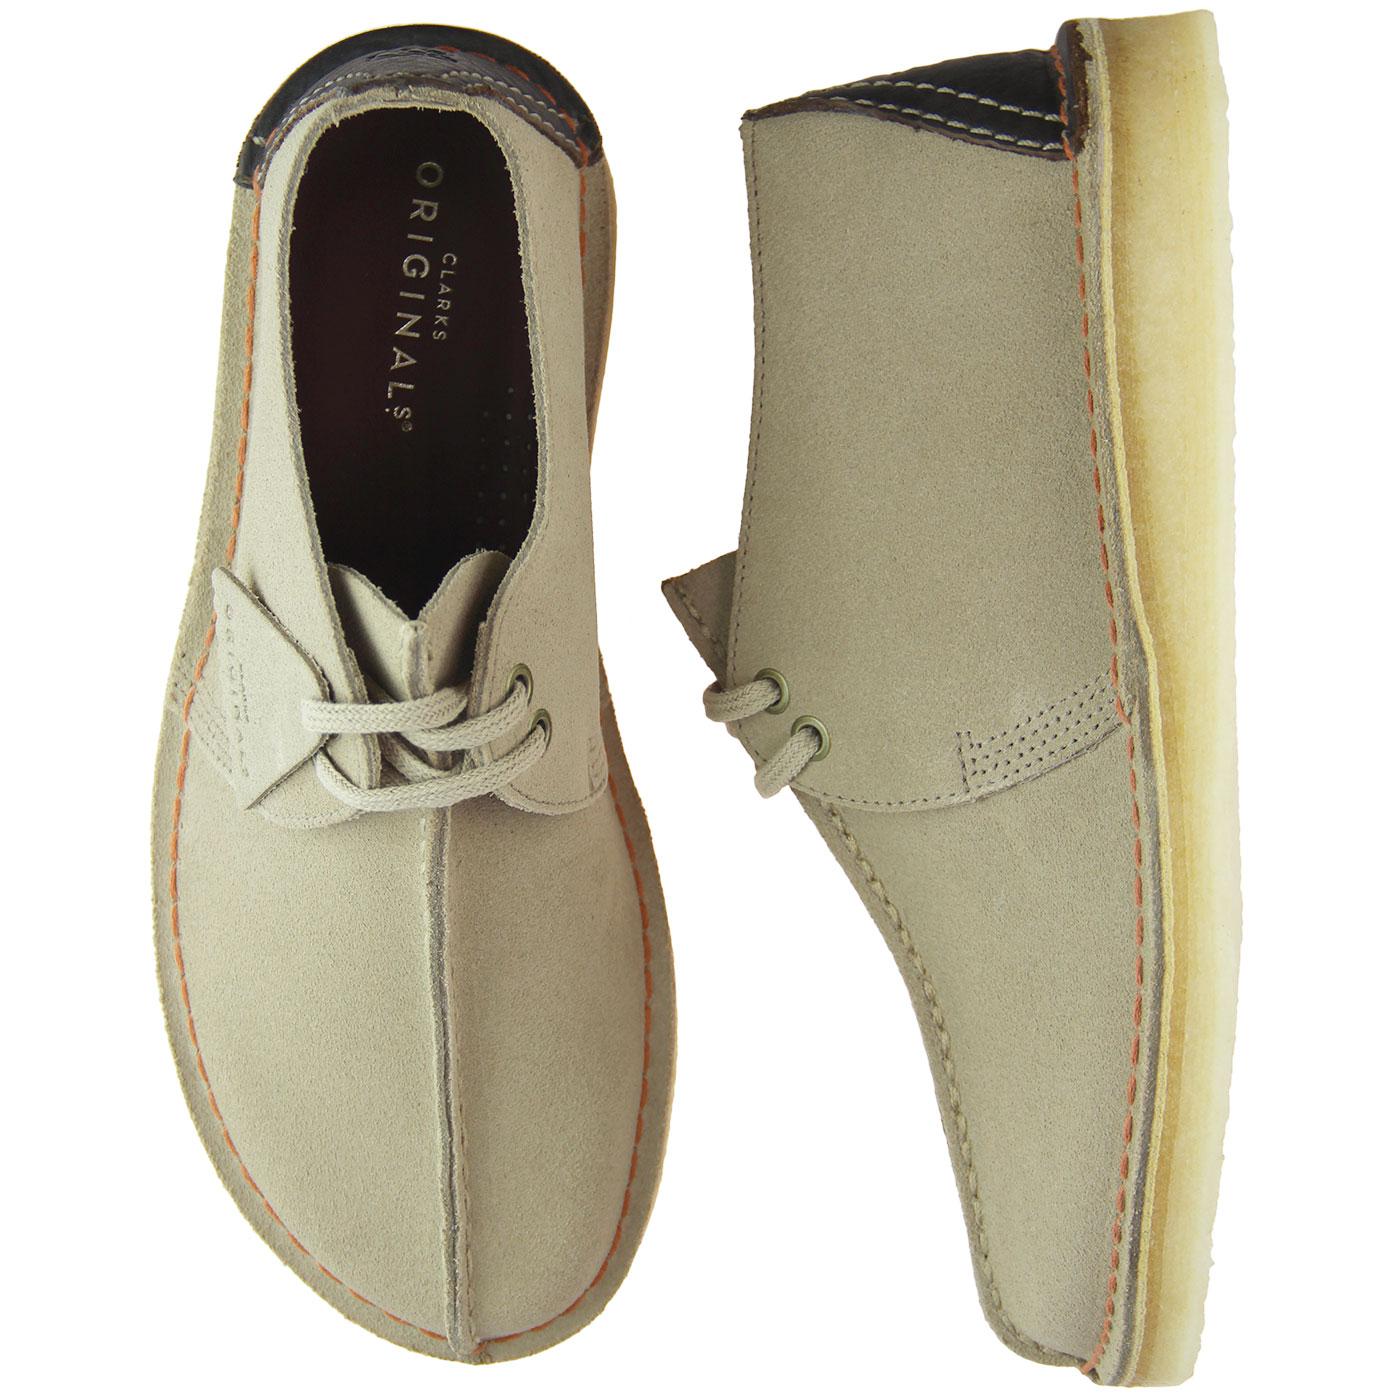 clarks shoes 1970s